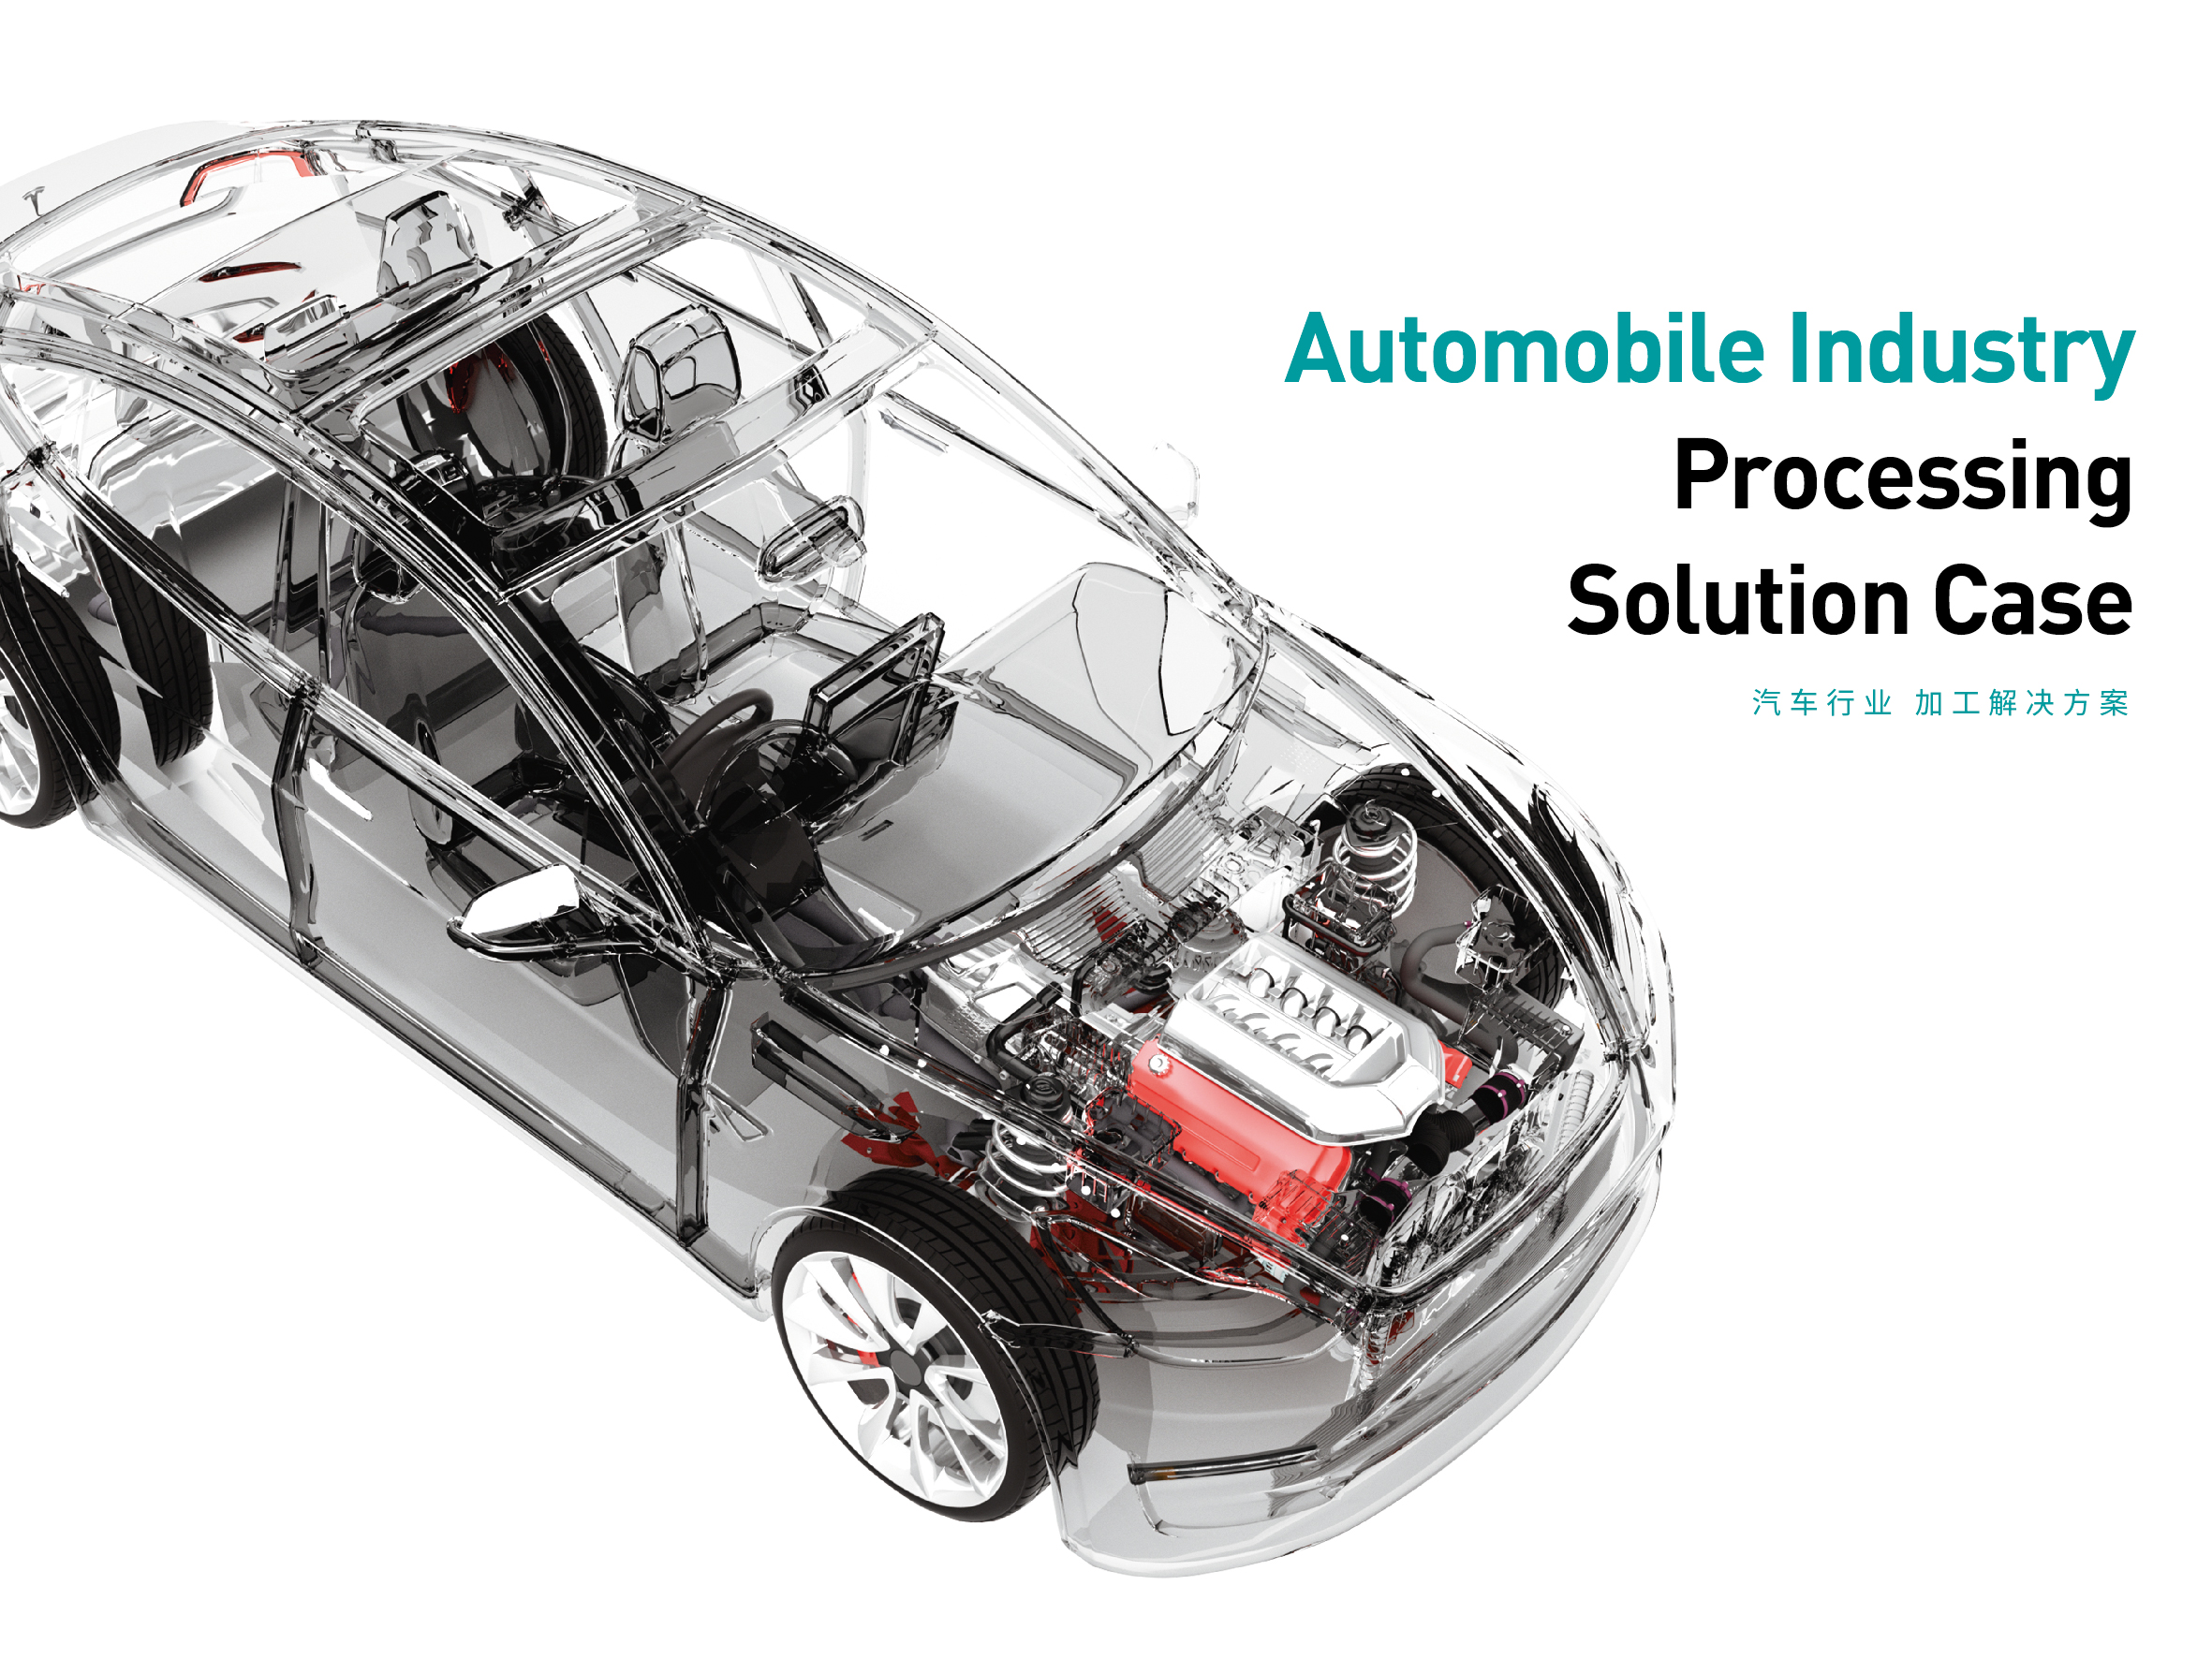 Automobile Industry Processing Solution Case